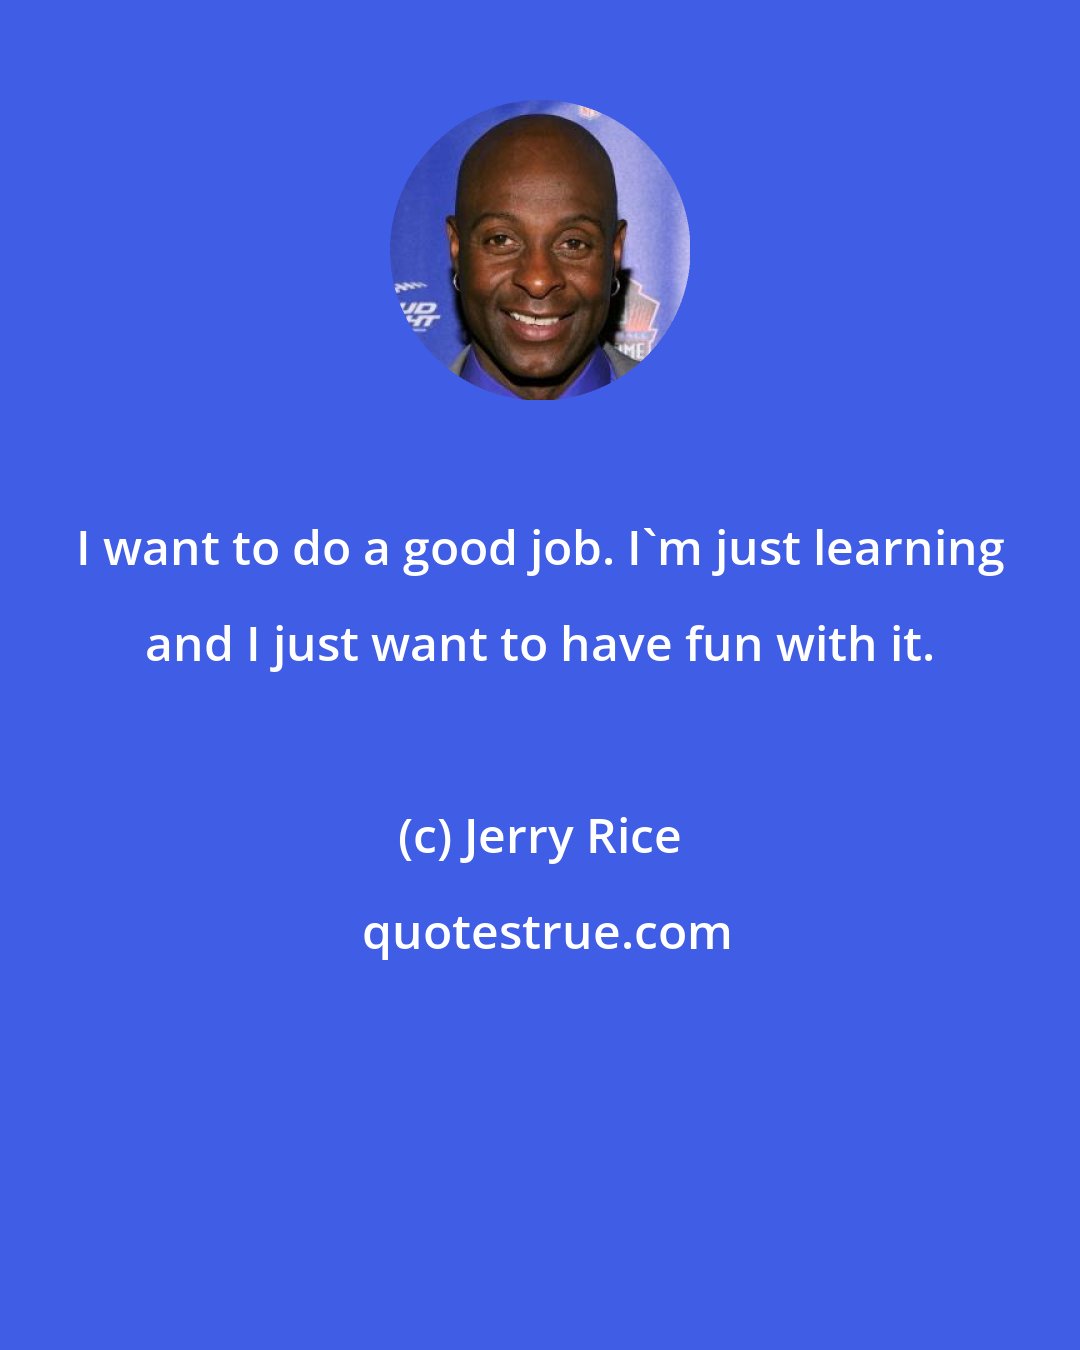 Jerry Rice: I want to do a good job. I'm just learning and I just want to have fun with it.